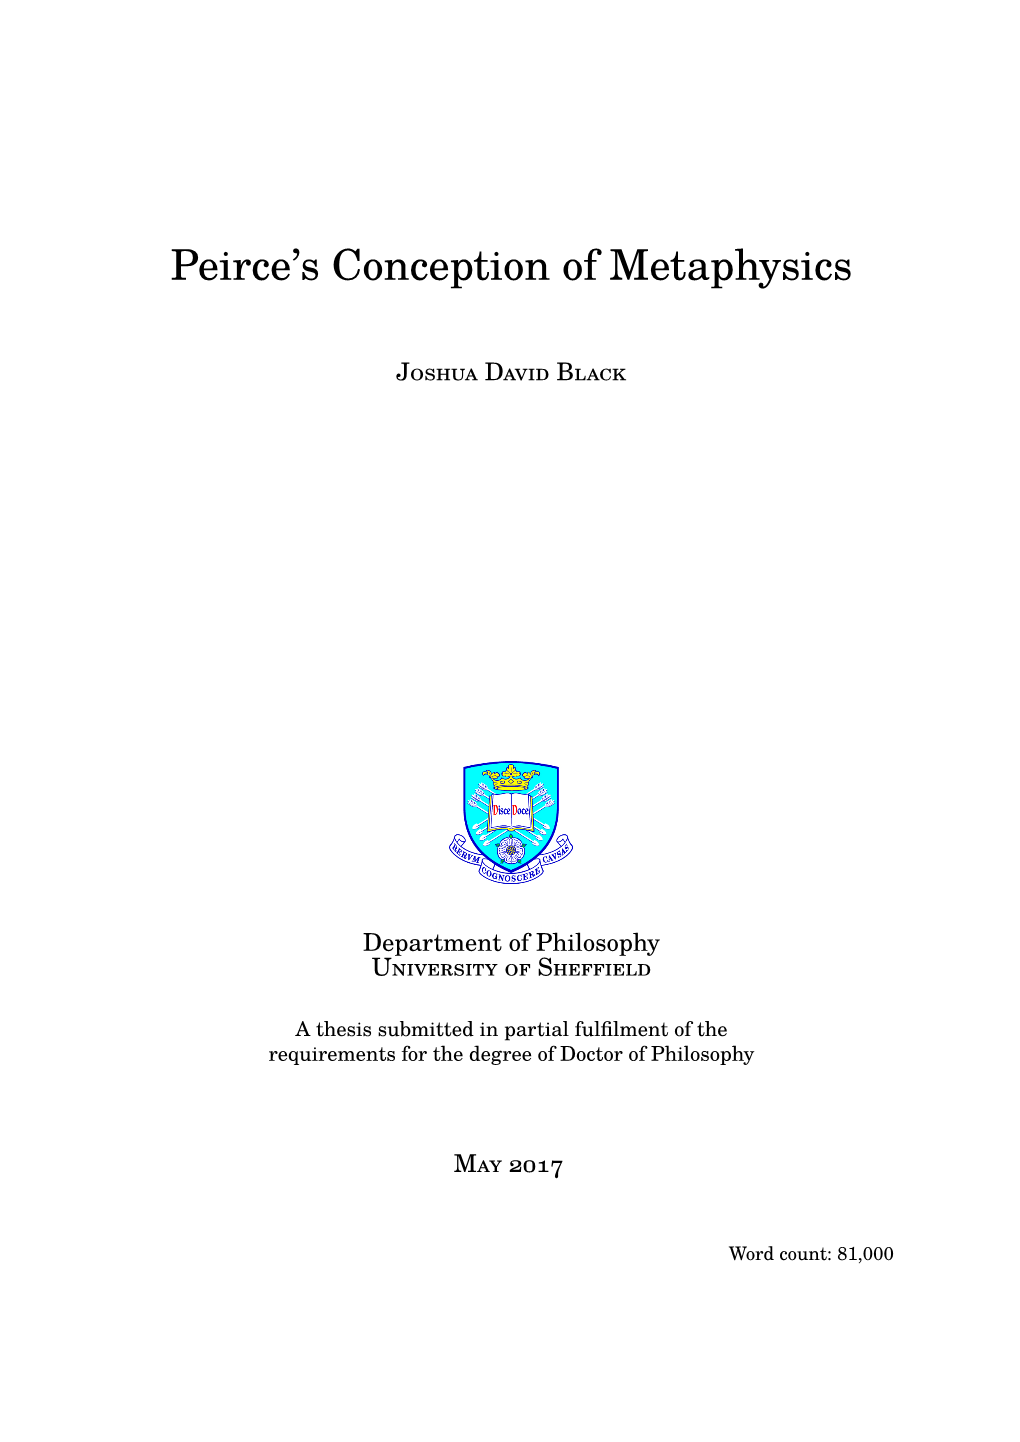 Peirce's Conception of Metaphysics